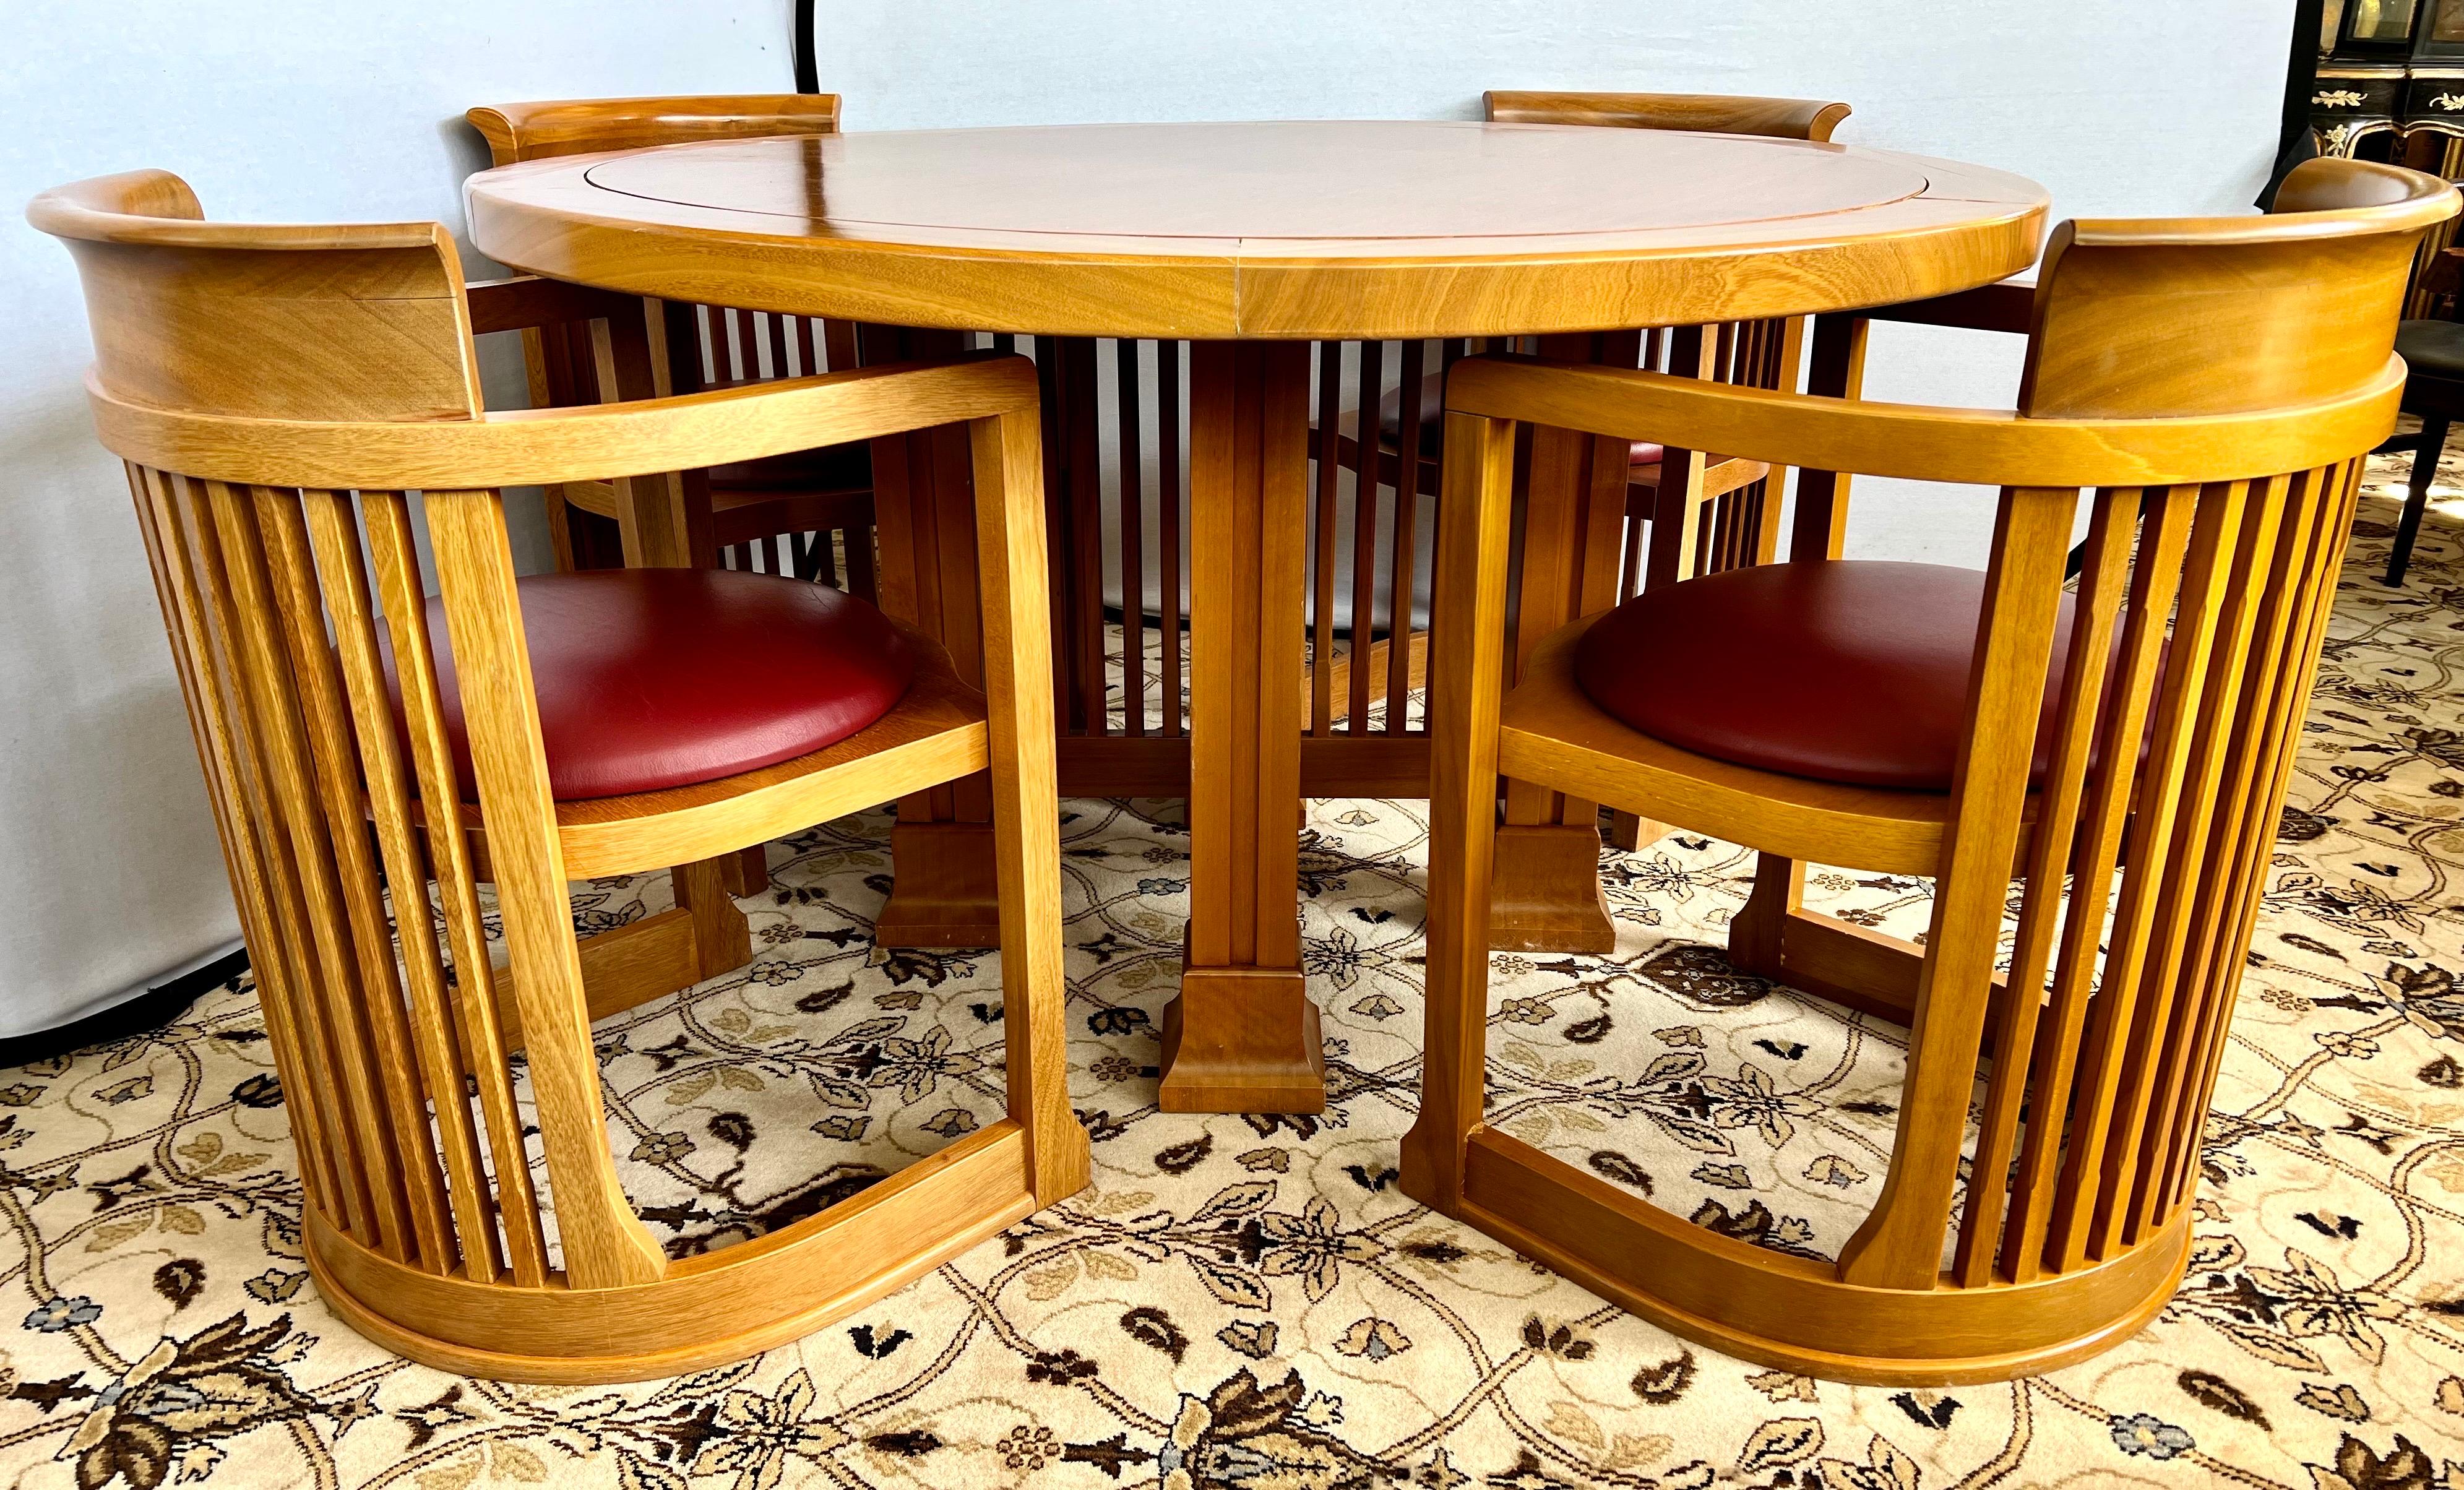 Exceptional five piece dining room set designed by Frank Lloyd Wright in 1937, relaunched in 1986. Manufactured by Cassina in Italy. The table is round as shown and is surrounded by four matching barrel chairs.
A timeless design informed by